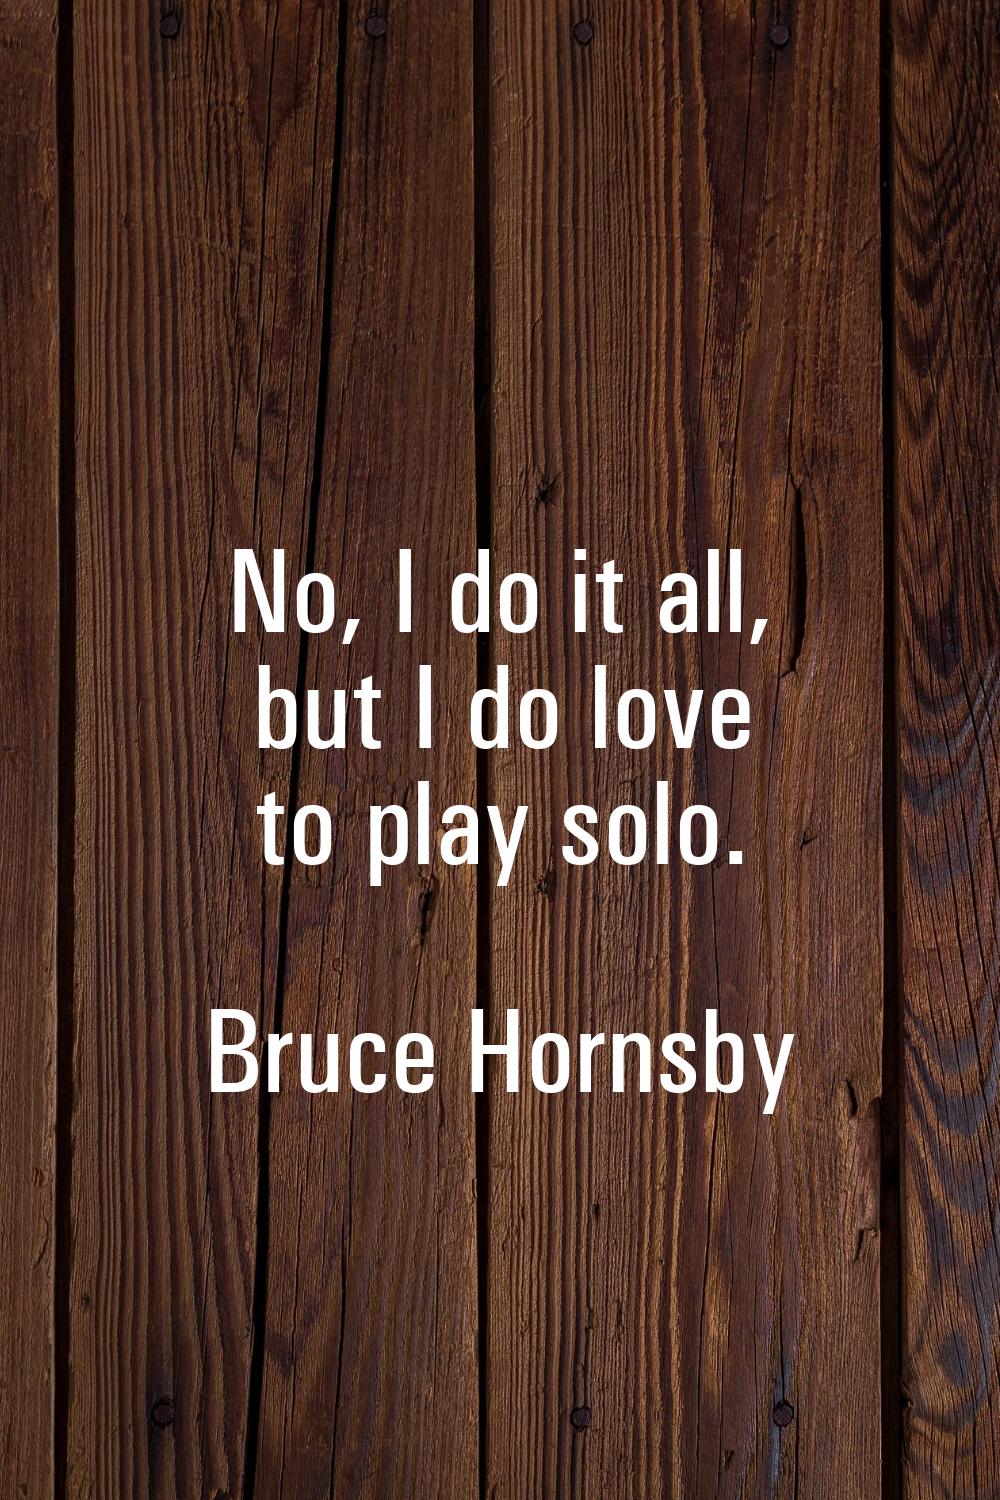 No, I do it all, but I do love to play solo.